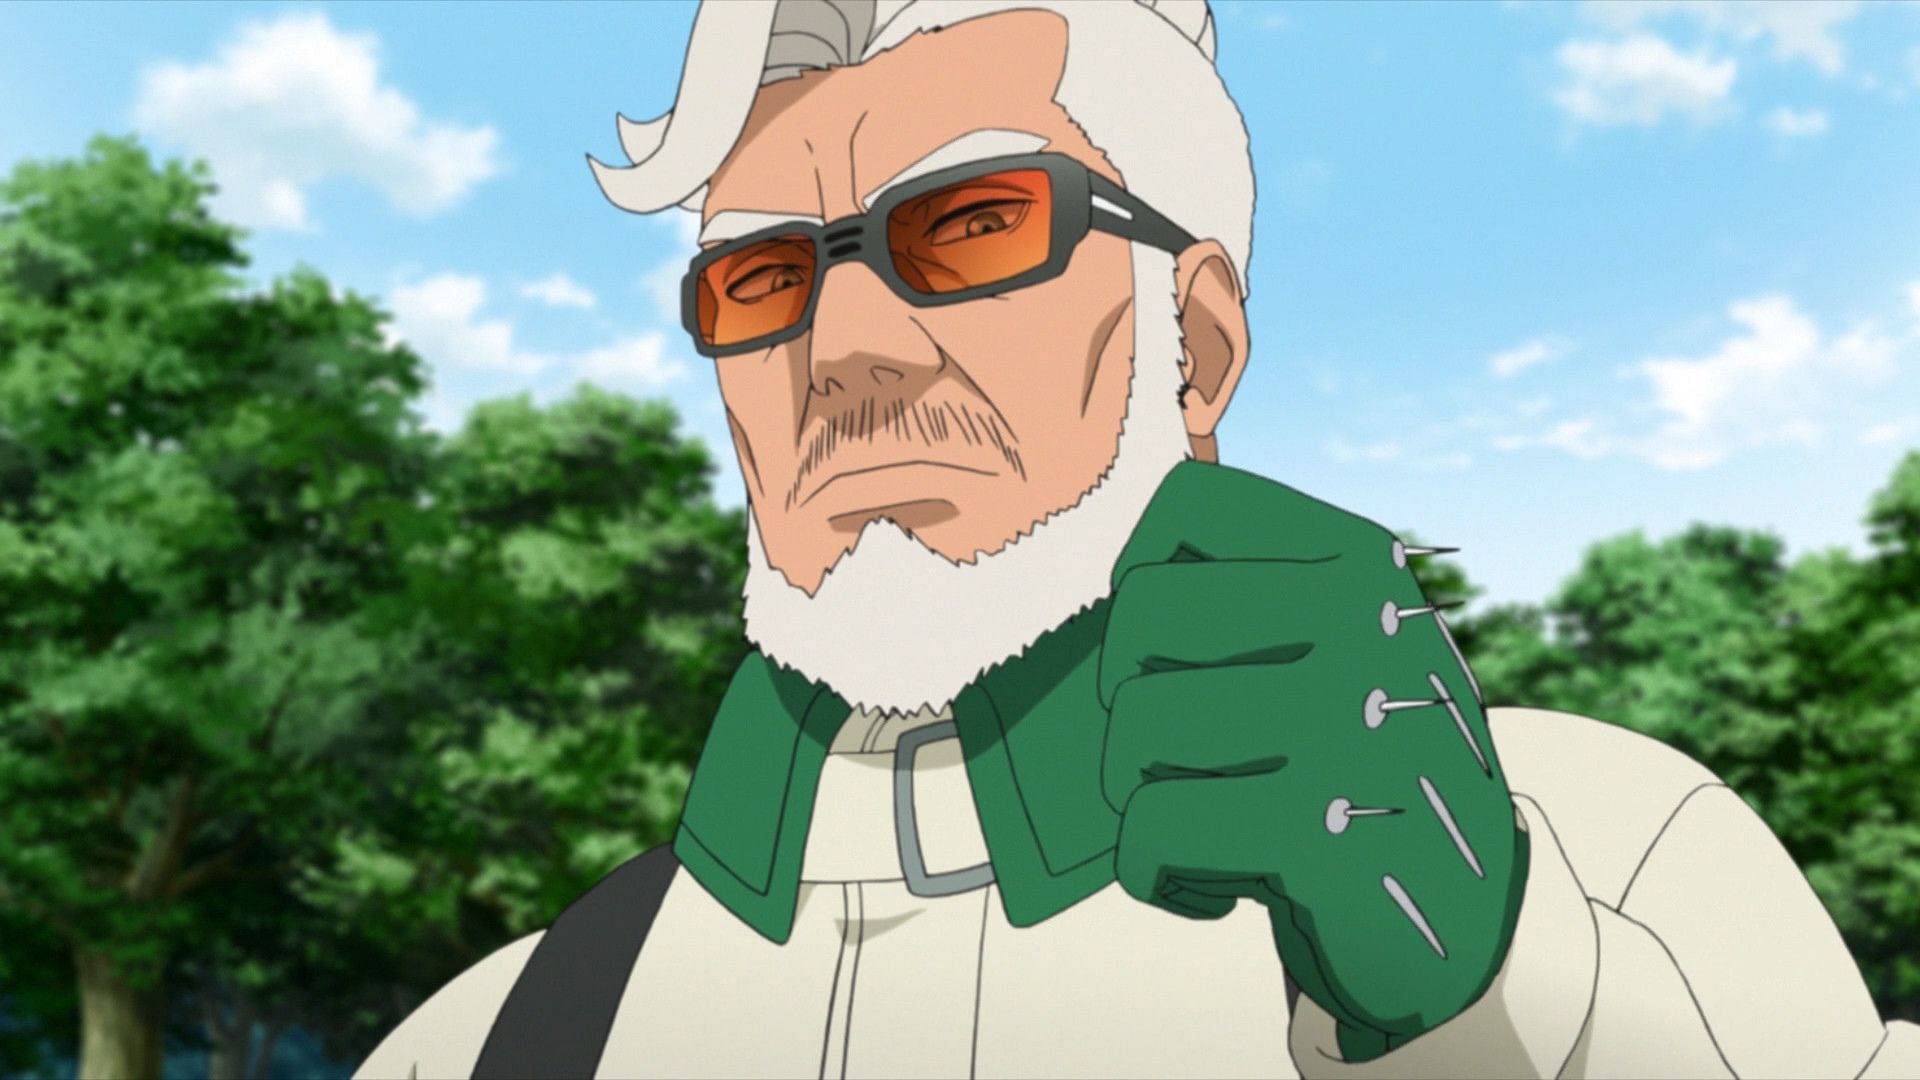 Amado was introduced as a villain in the series (Image via Studio Pierrot)